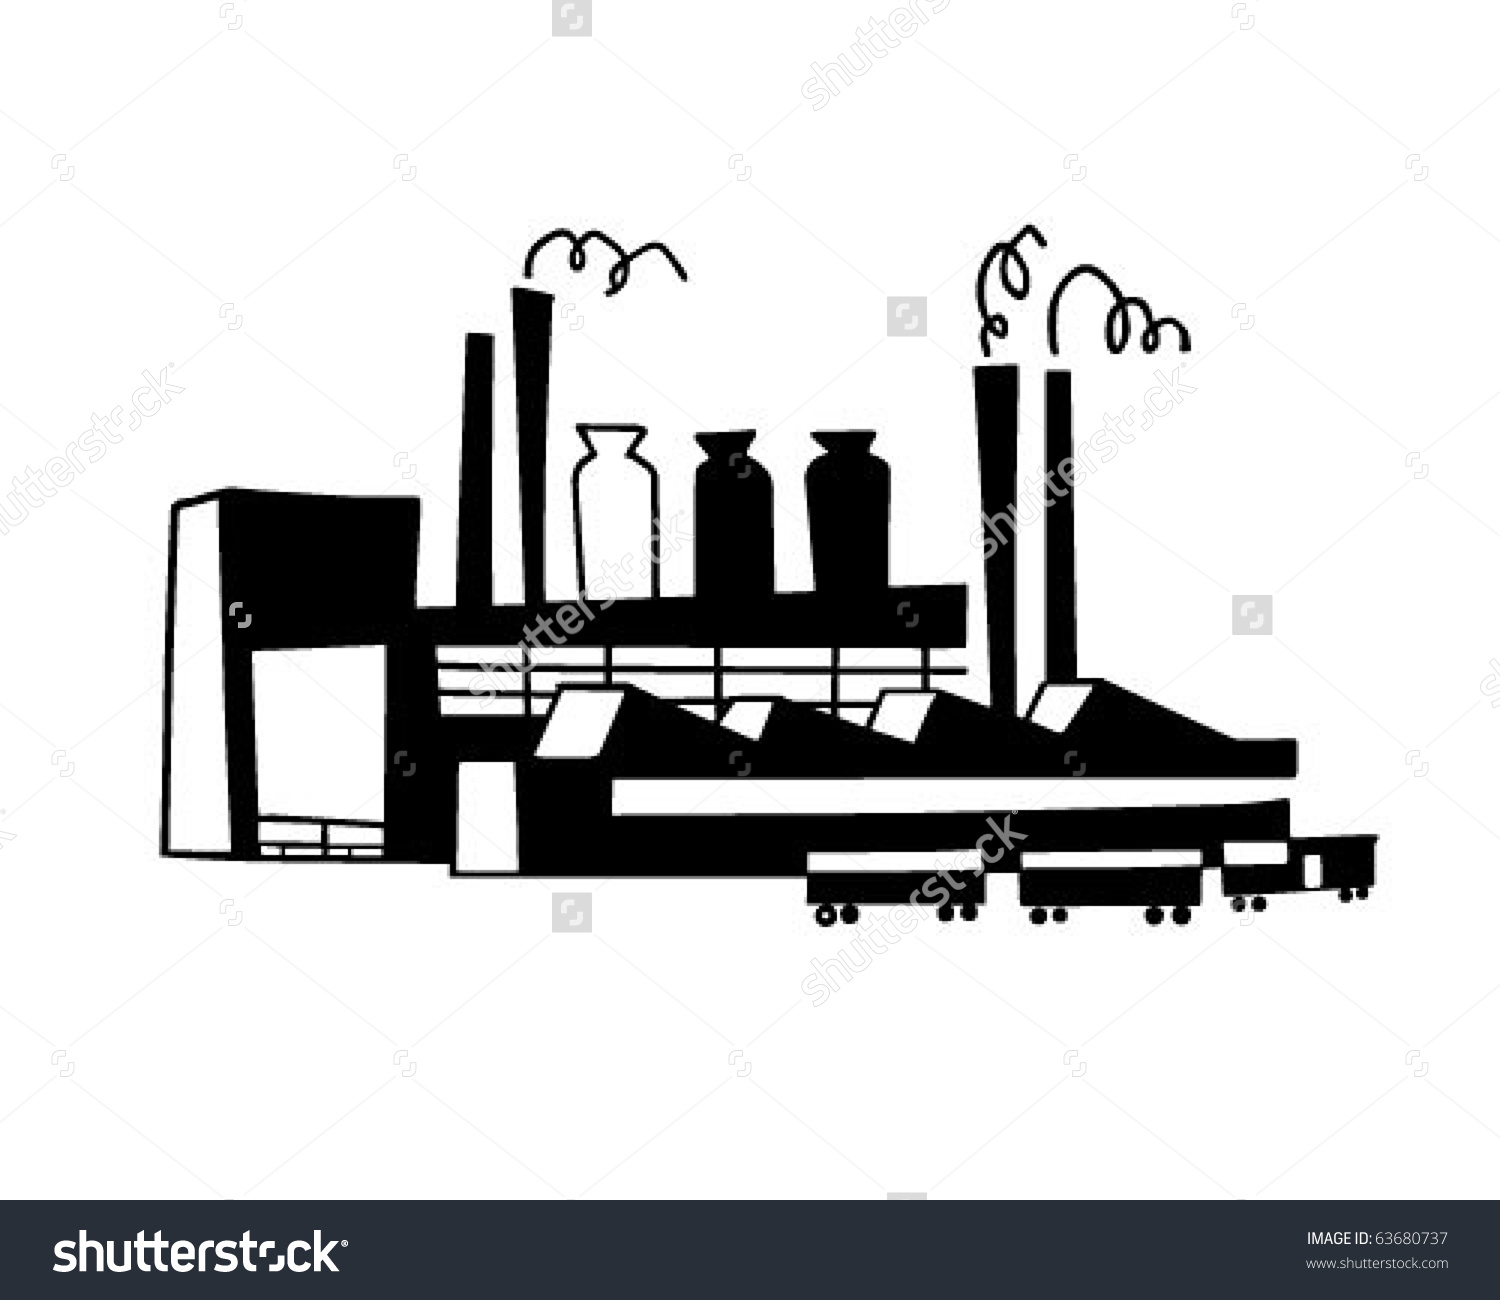 industrial clipart - photo #15